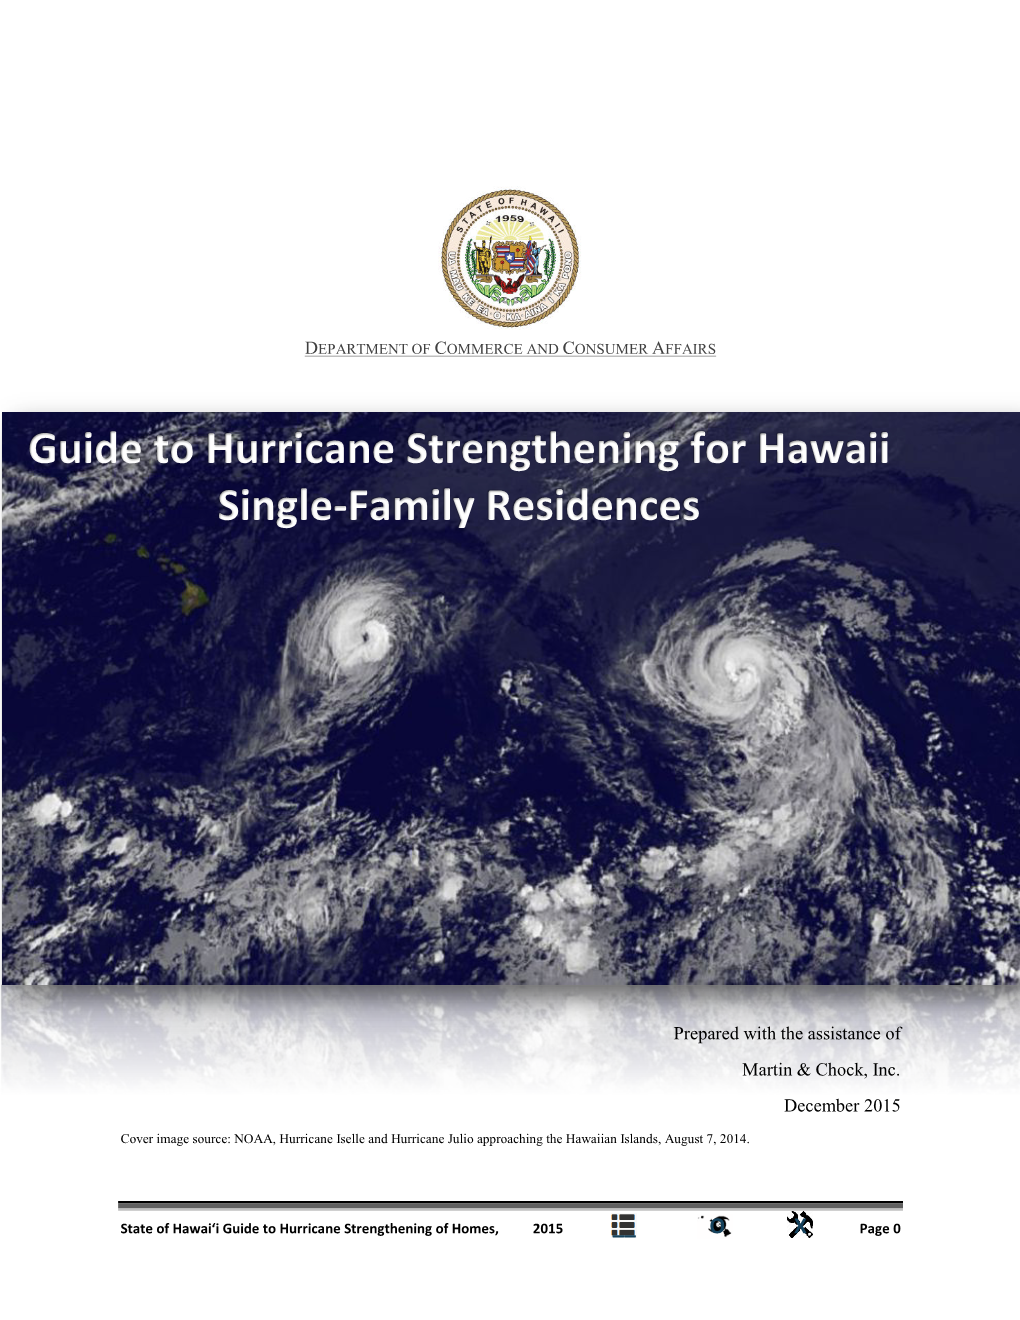 Guide to Hurricane Strengthening for Hawaii Single-Family Residences